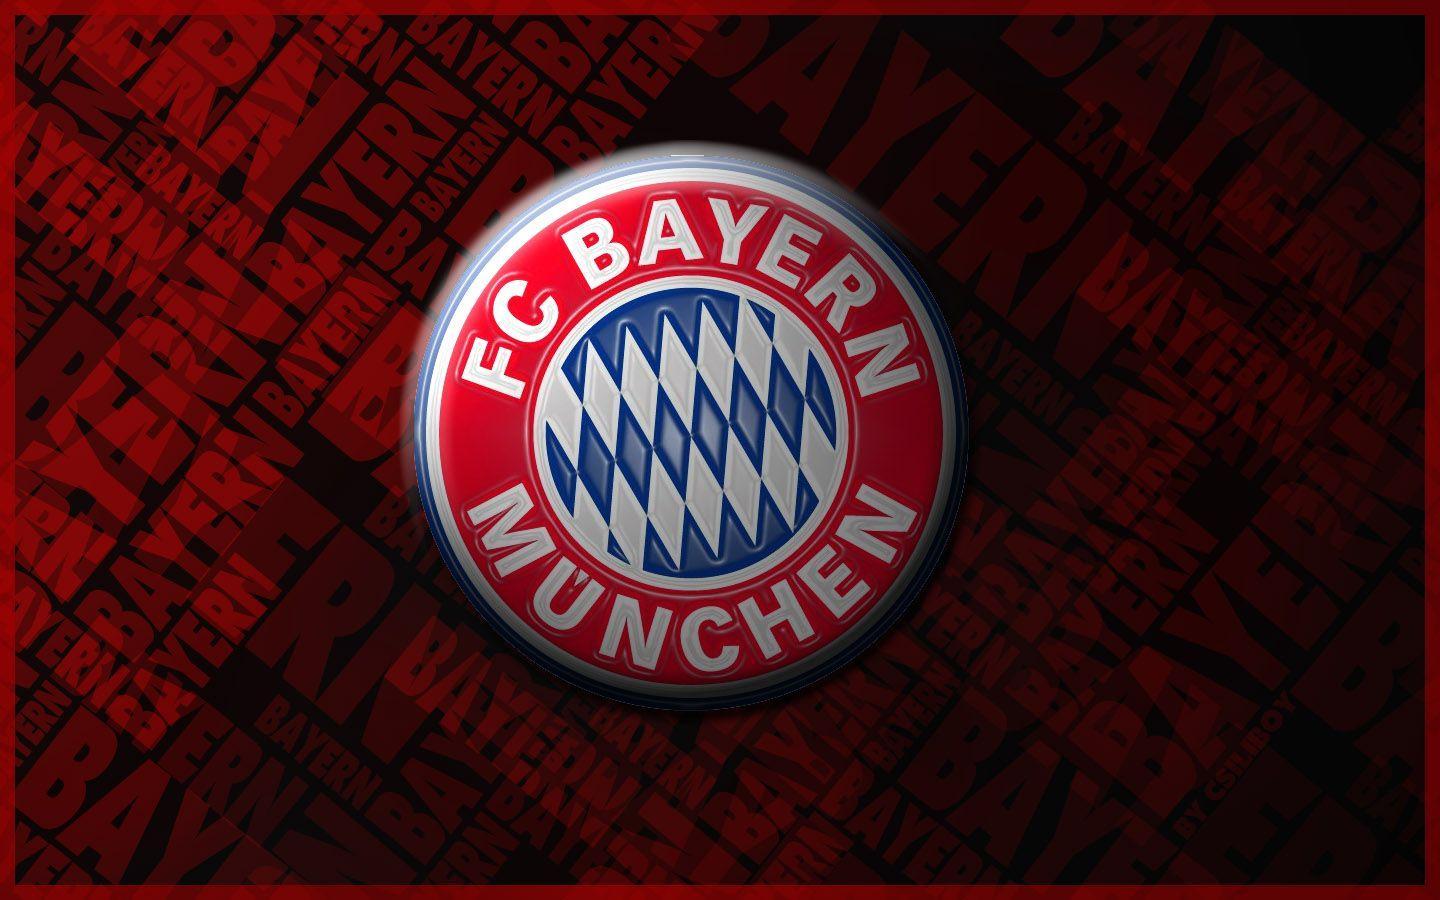 Bayern Munchen HD Wallpaper for Desktop, iPhone, iPad, and Android